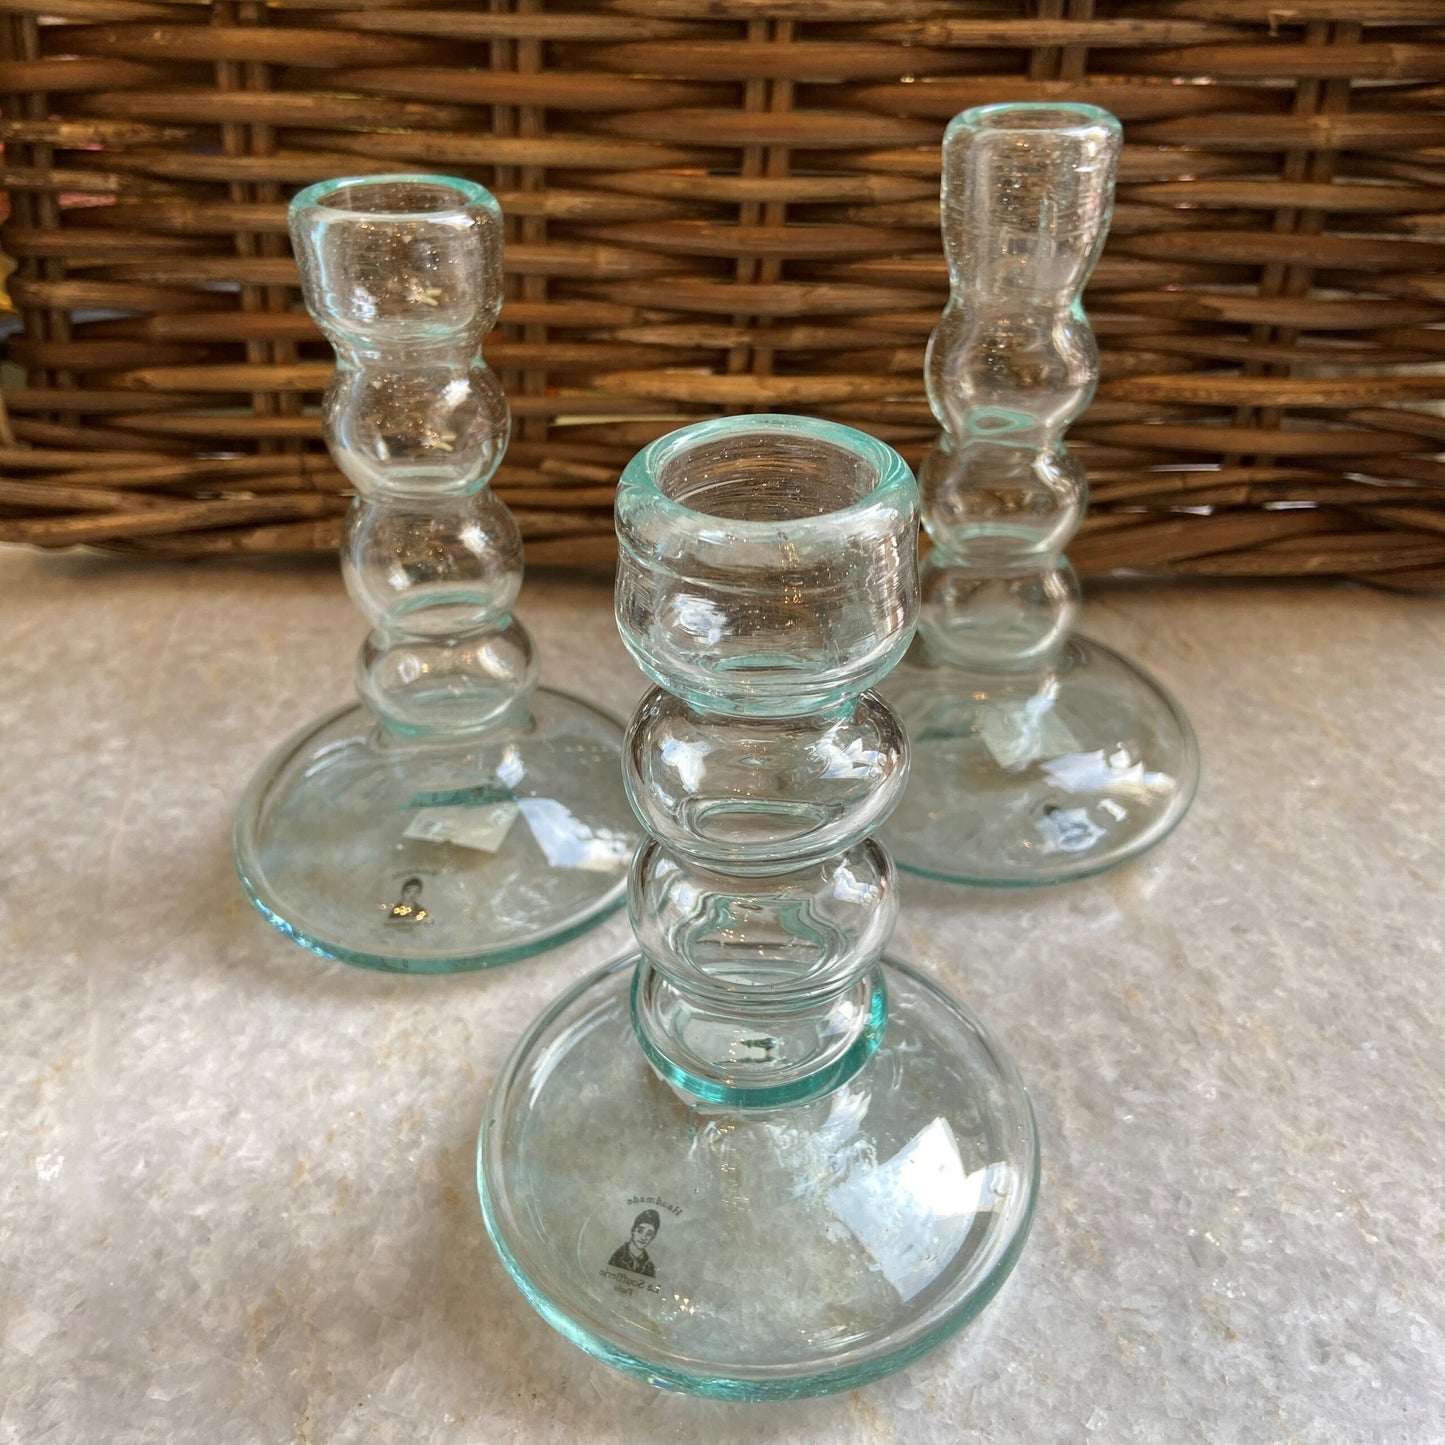 French Bougeoir Bulles Glass Candlestick